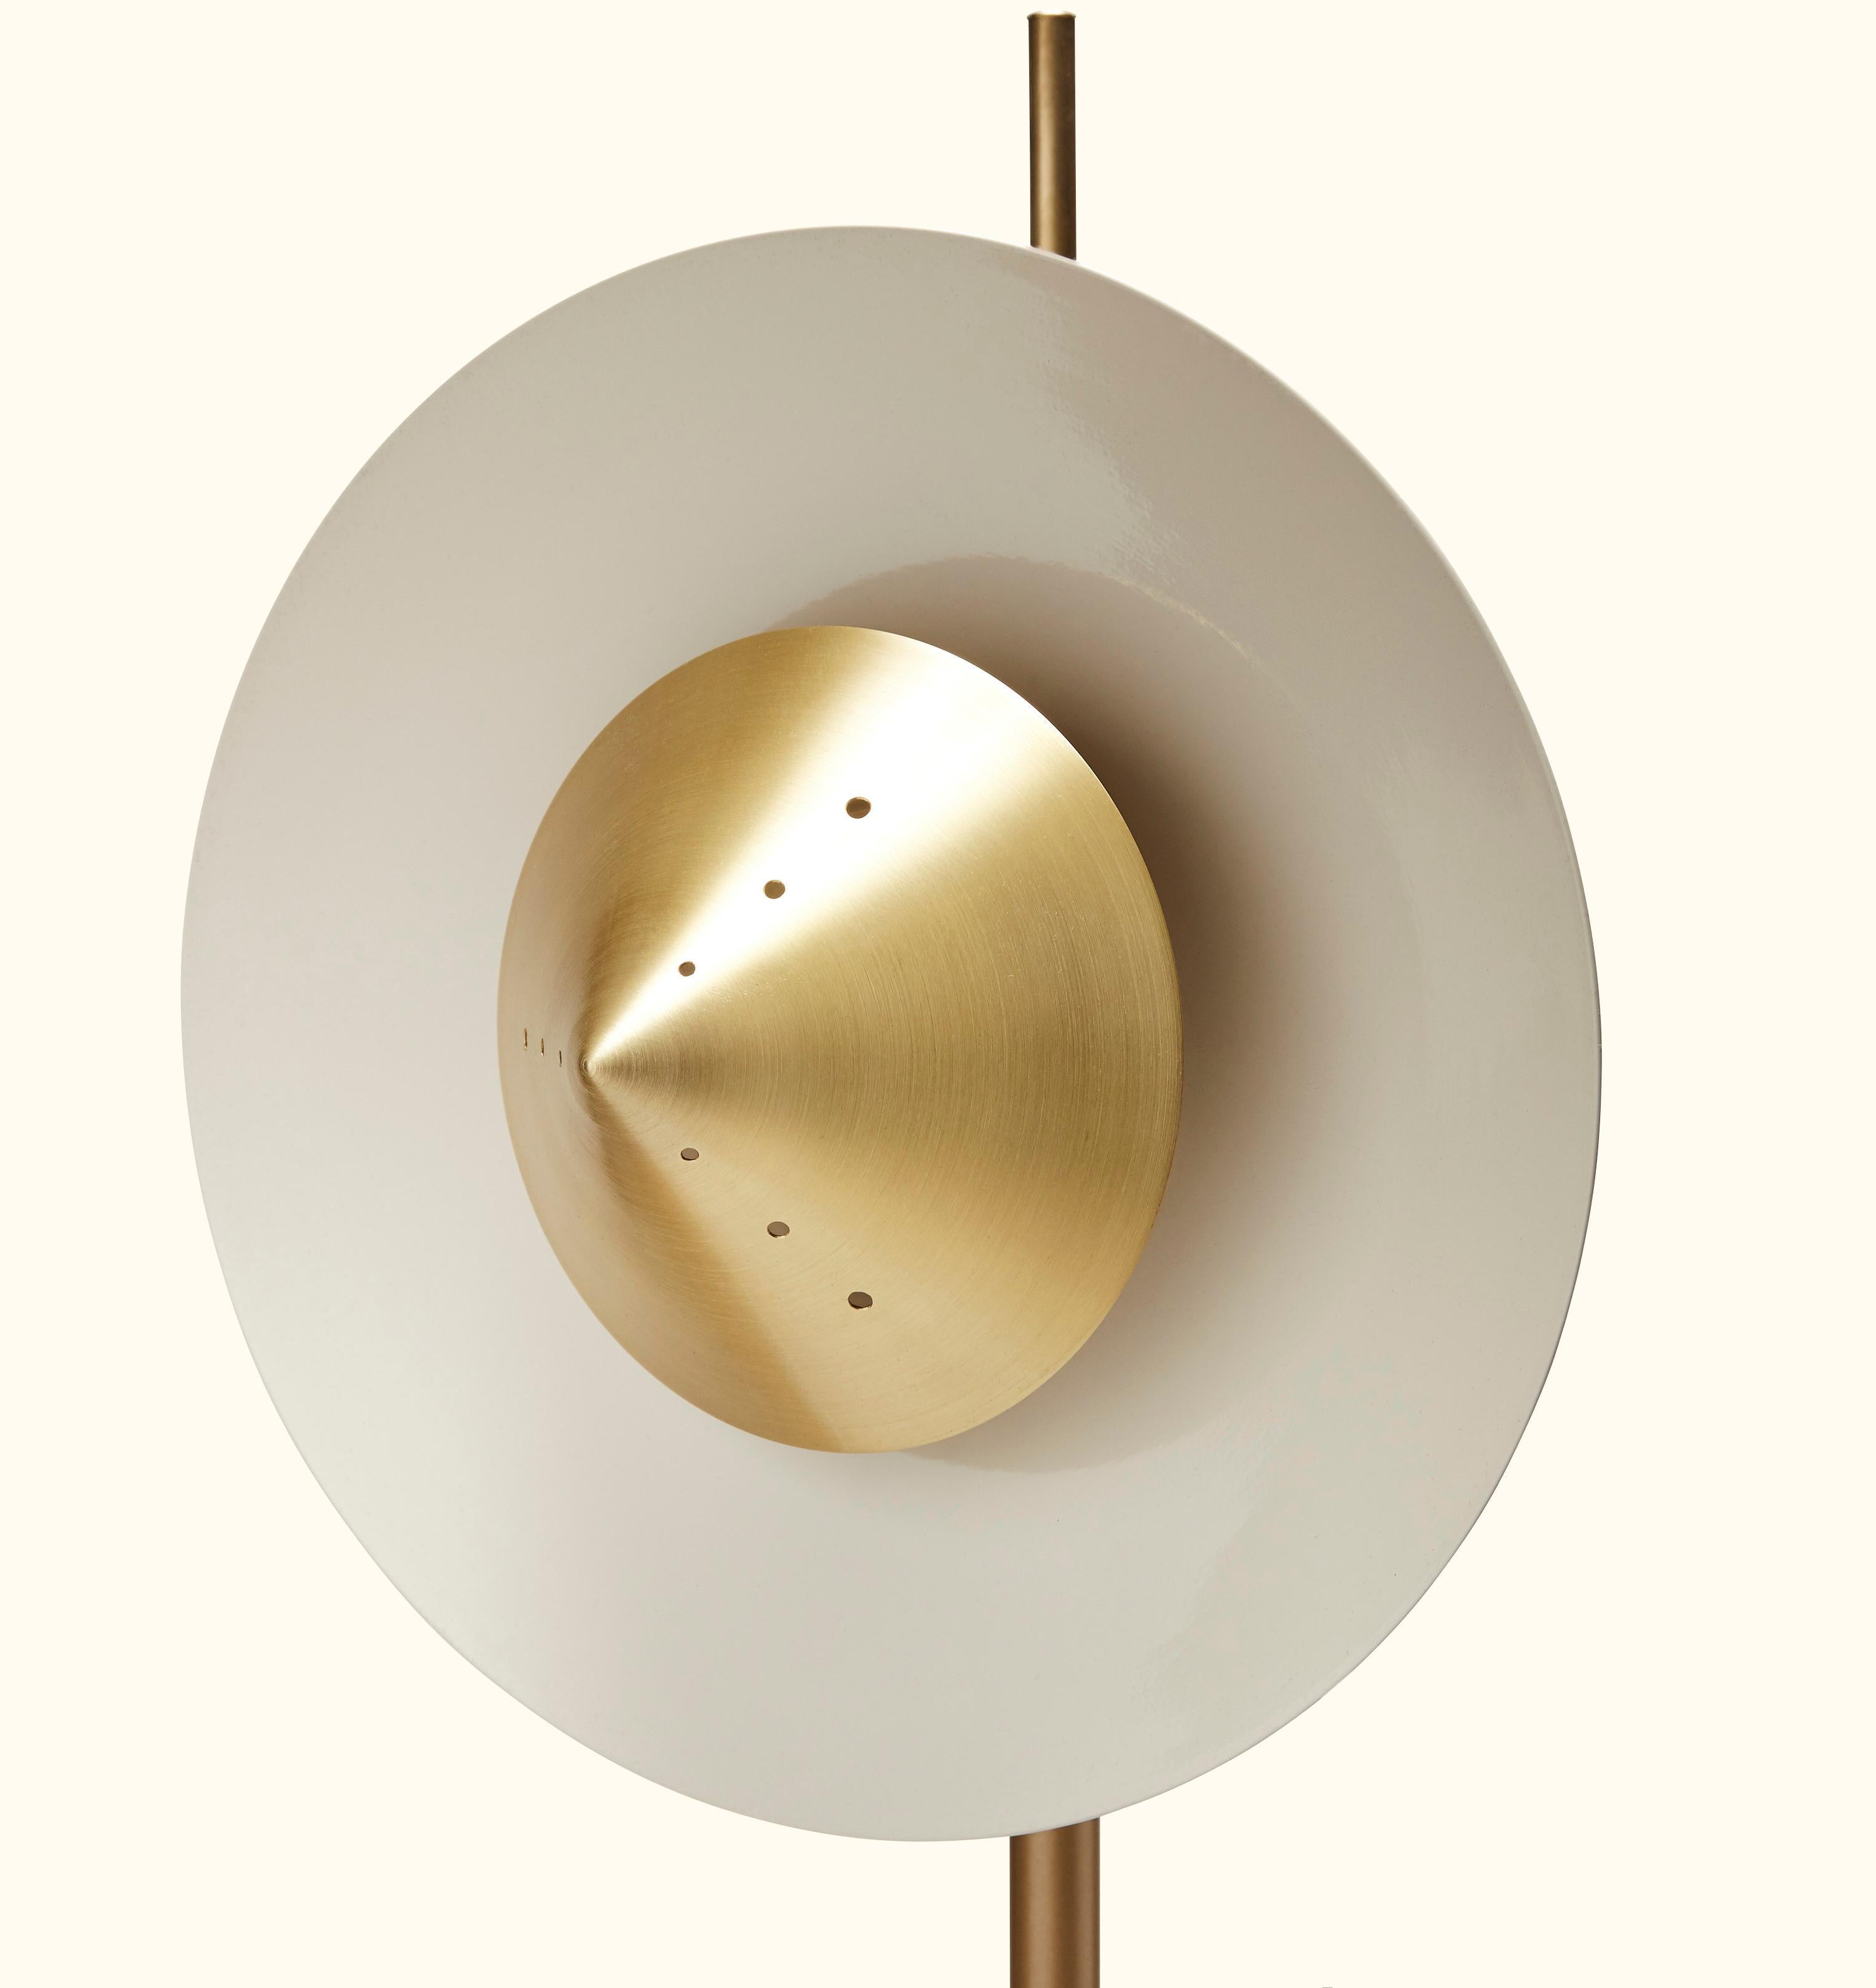 The Pruckel floor lamp features a circular spun metal shade with a perforated brass cone and turned white oak or American walnut base. The shade is adjustable and can be fastened at any desired height.